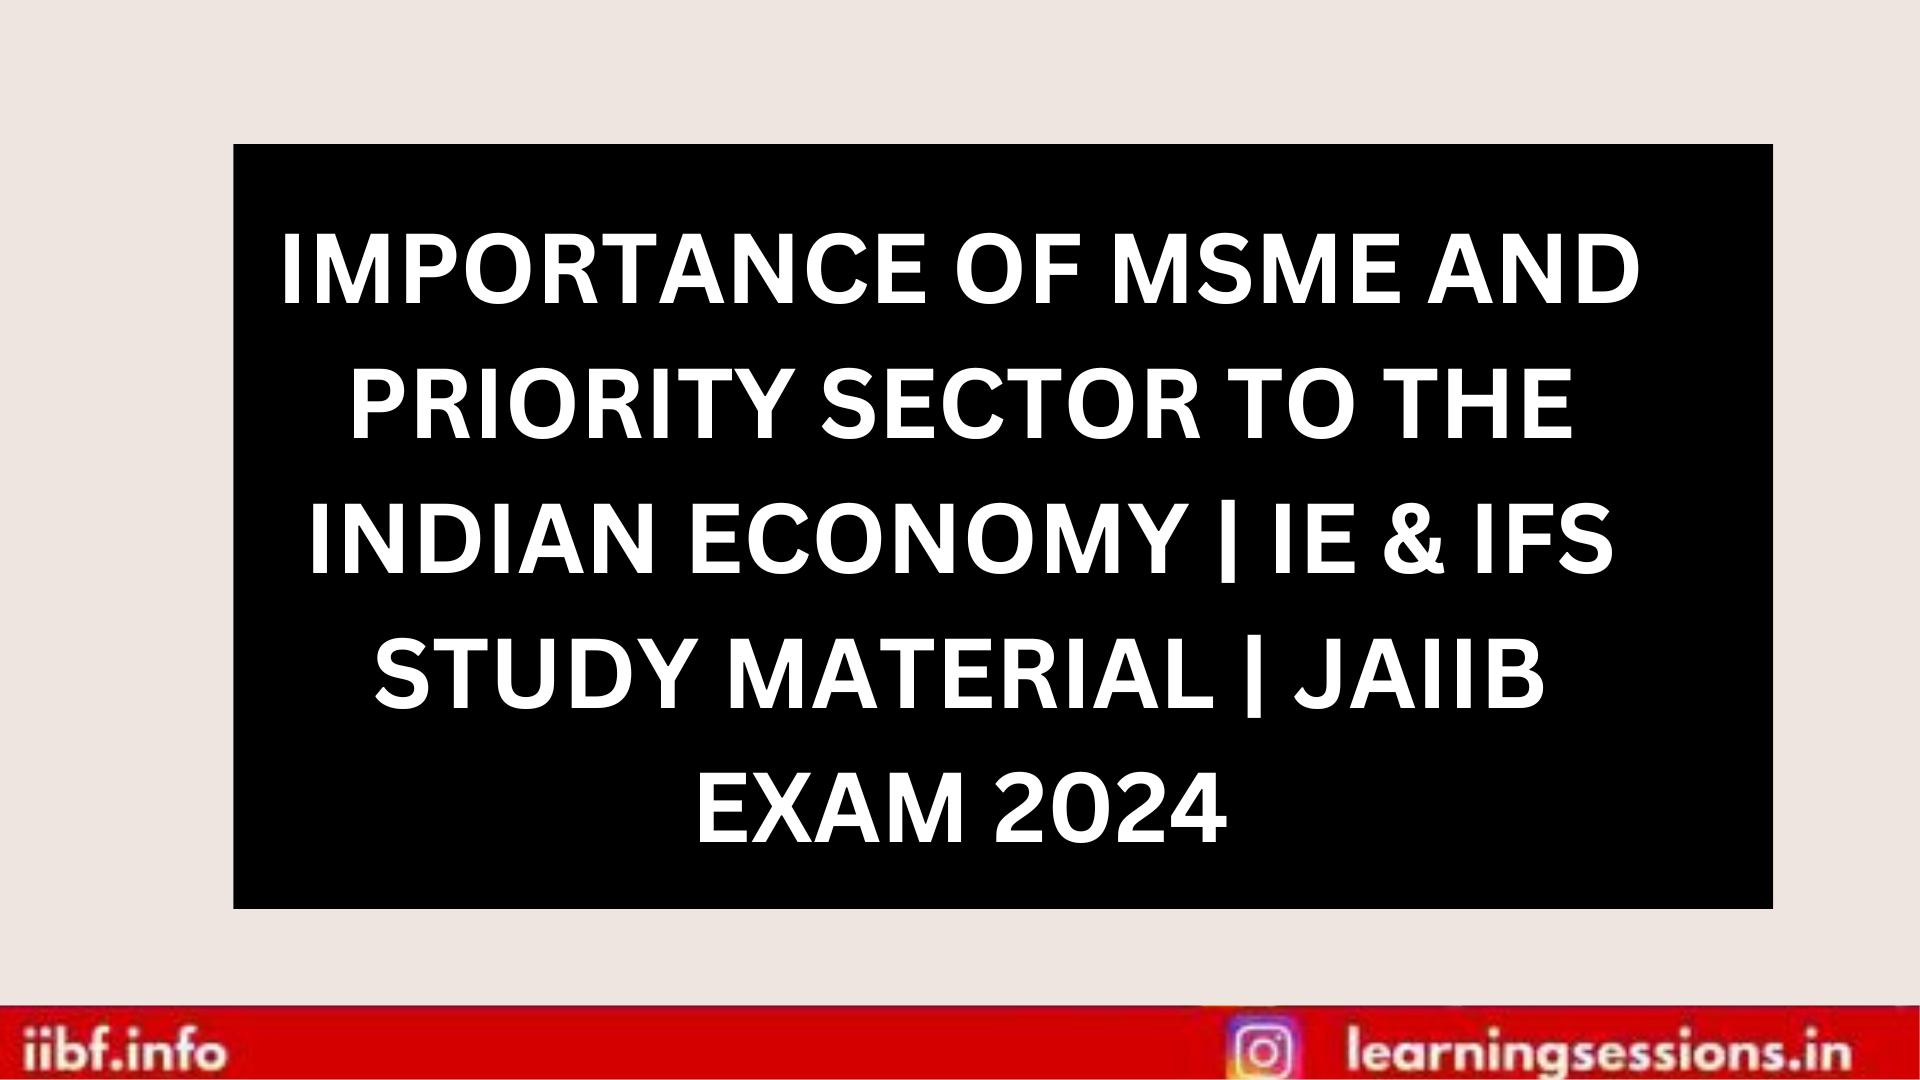 IMPORTANCE OF MSME AND PRIORITY SECTOR TO THE INDIAN ECONOMY | IE & IFS STUDY MATERIAL | JAIIB EXAM 2024